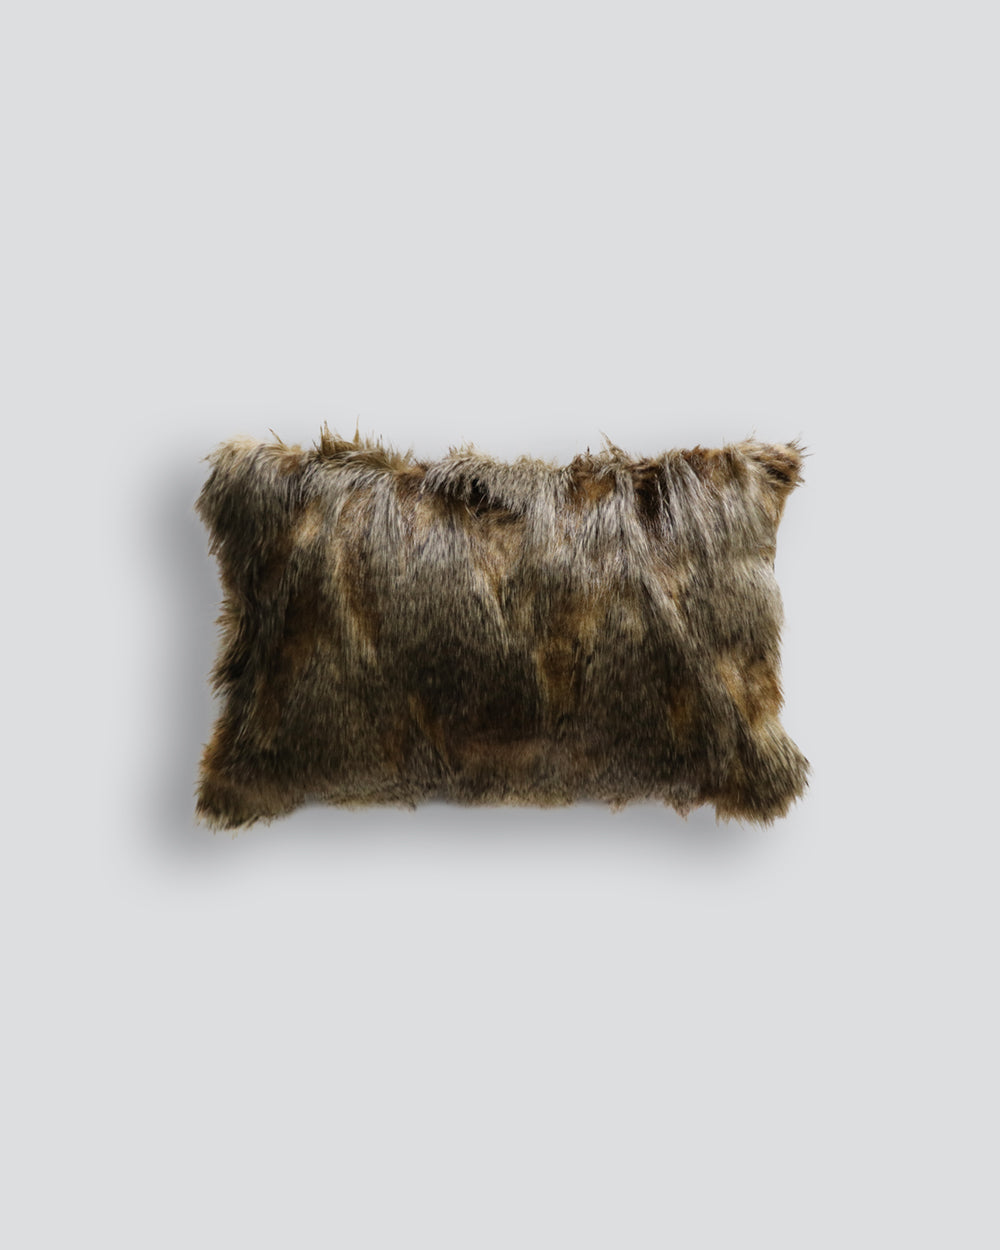 Heirloom Red Fox Cushions in Faux Fur are available from Make Your House A Home Premium Stockist. Furniture Store Bendigo, Victoria. Australia Wide Delivery. Furtex Baya.